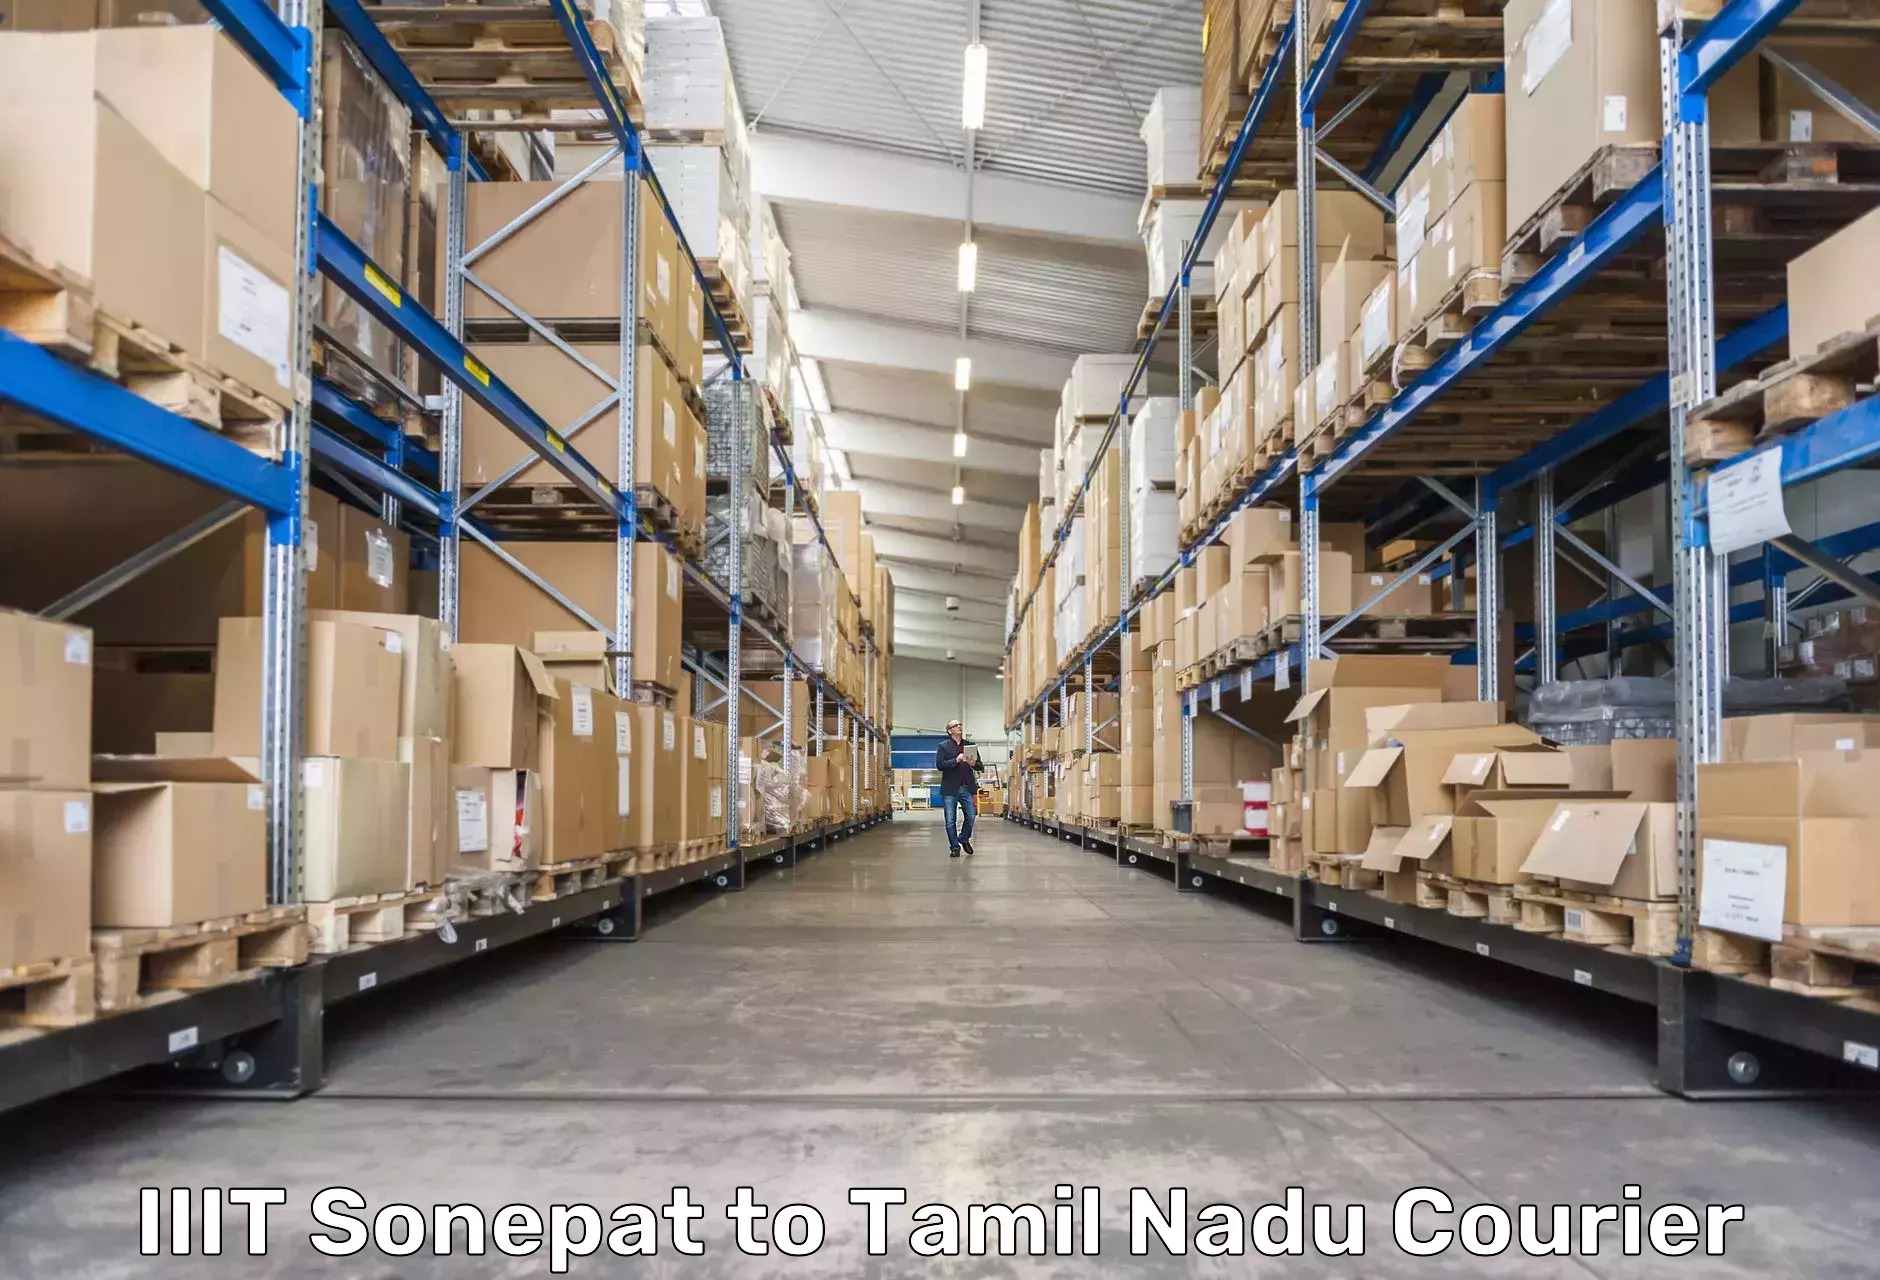 Easy access courier services IIIT Sonepat to Nagercoil